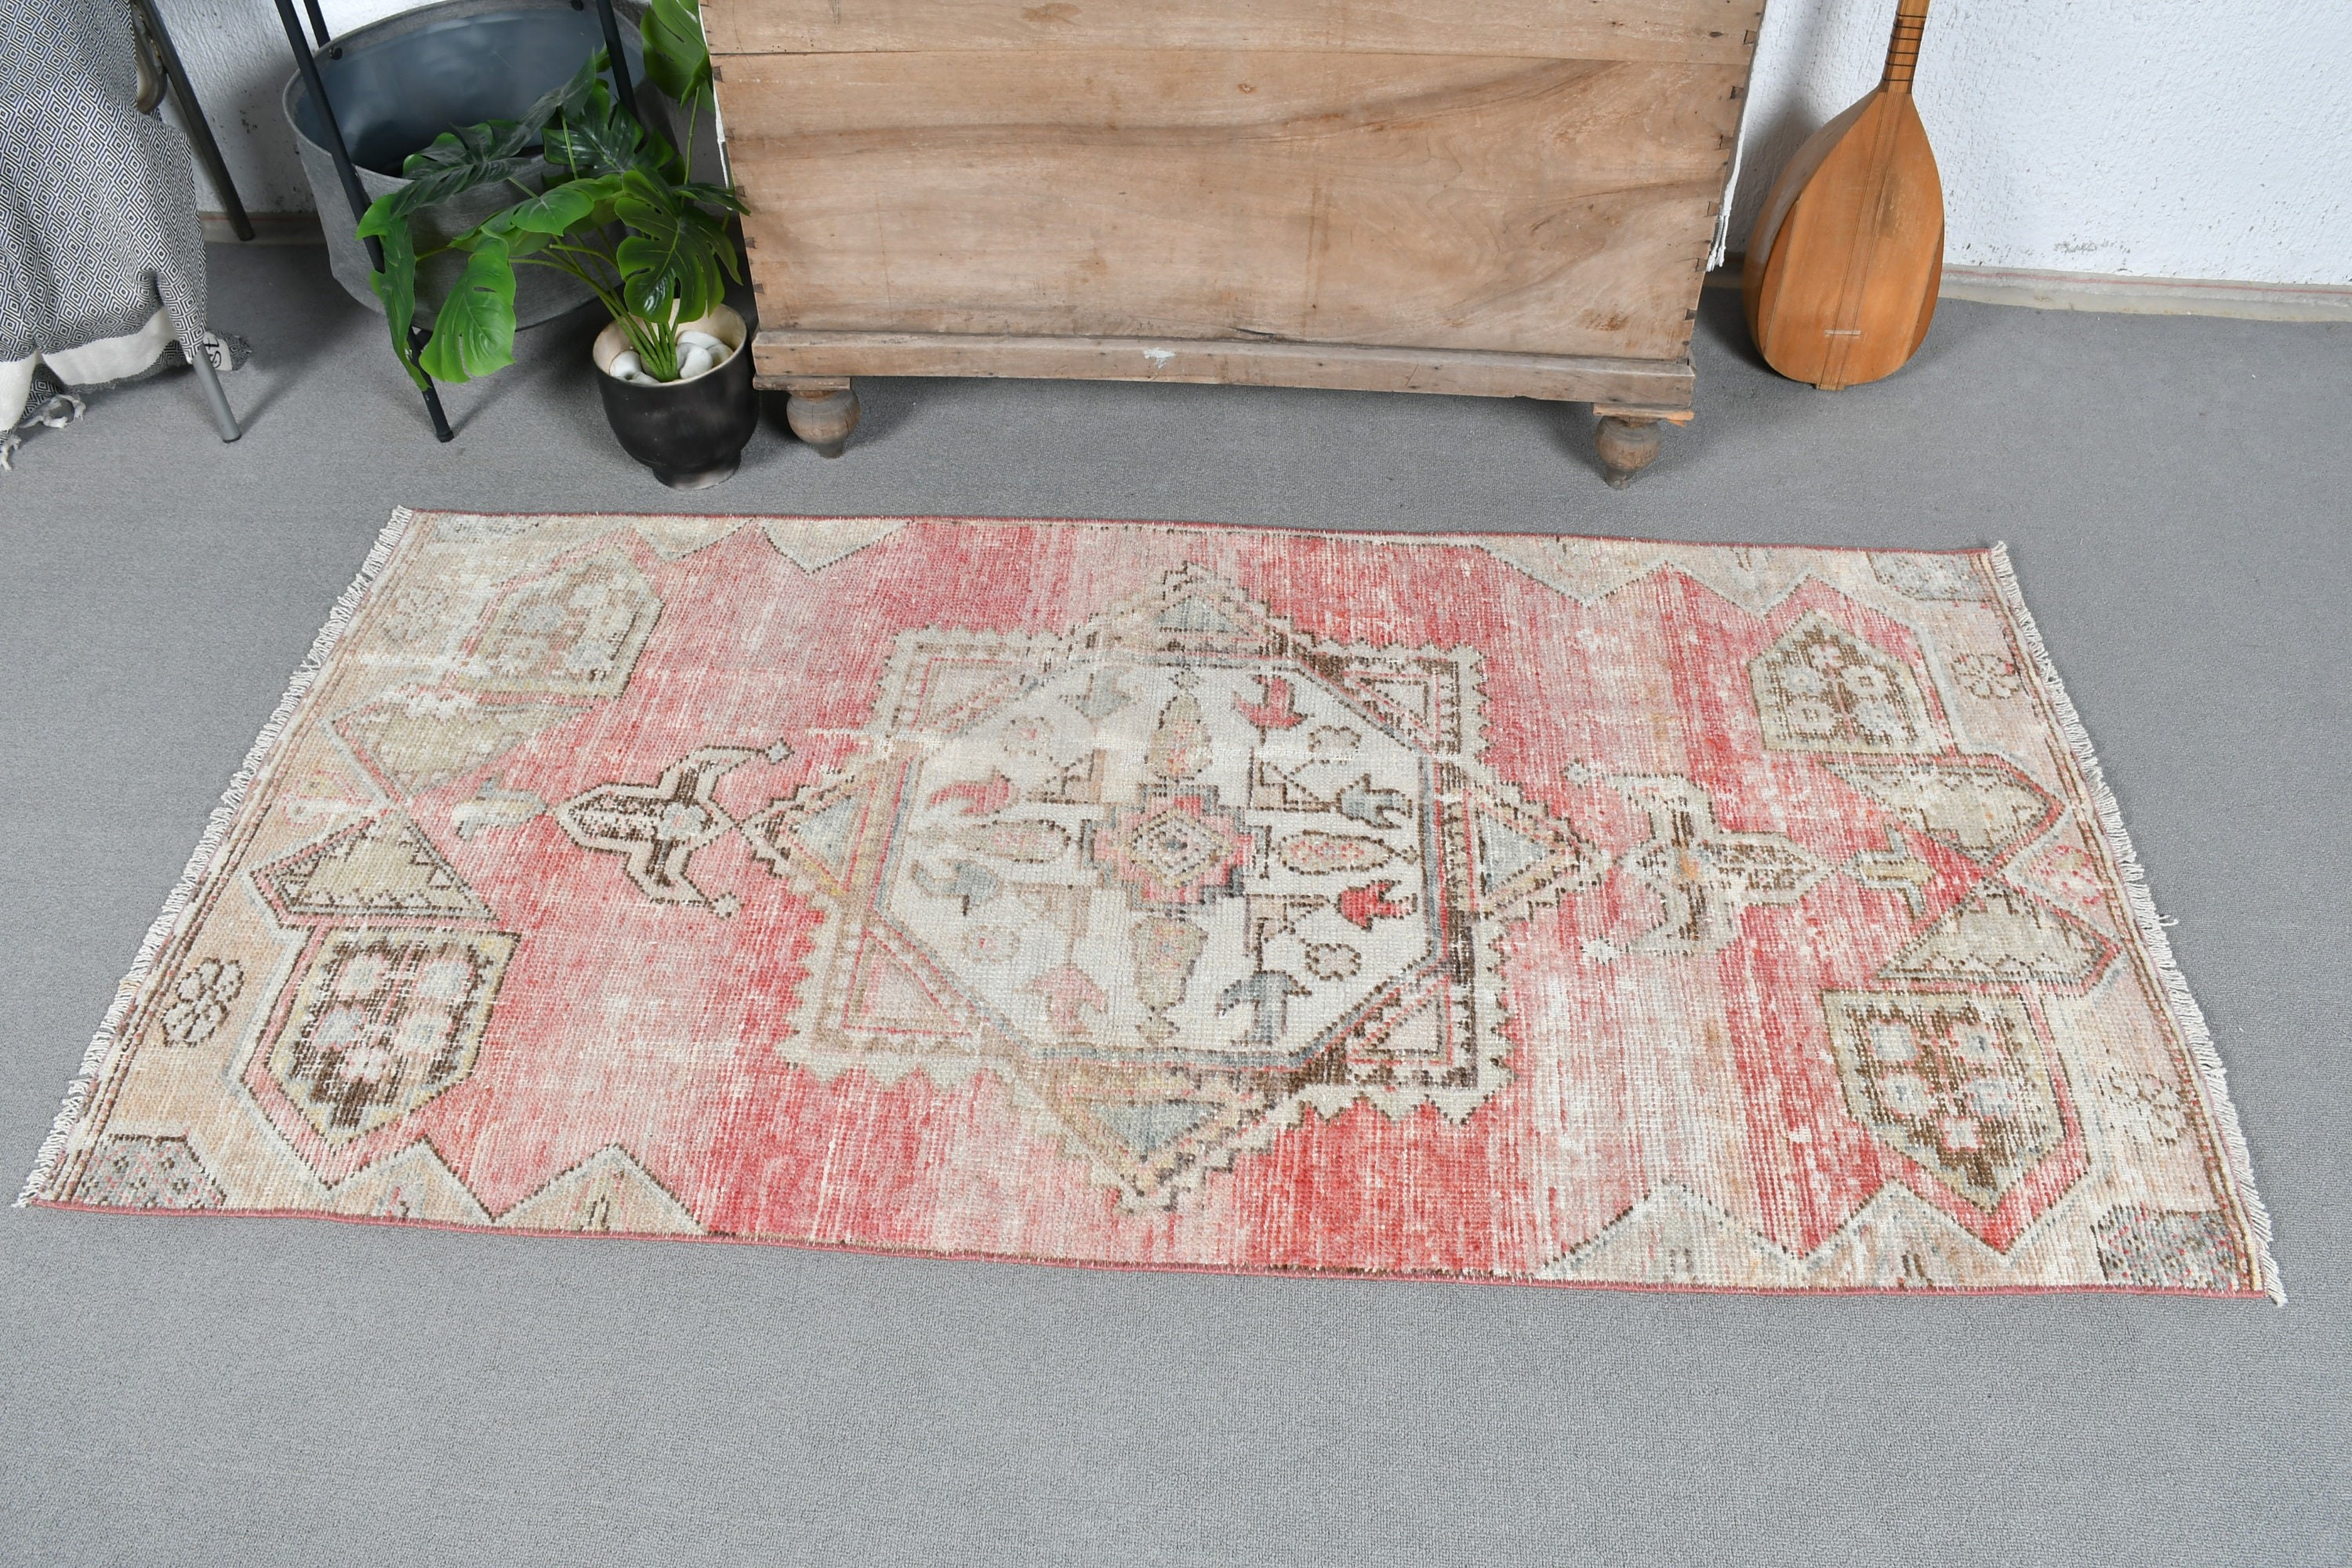 Designer Rug, Pink Home Decor Rugs, Entry Rug, Kitchen Rugs, Anatolian Rug, 3x6 ft Accent Rugs, Vintage Rugs, Turkish Rug, Antique Rugs